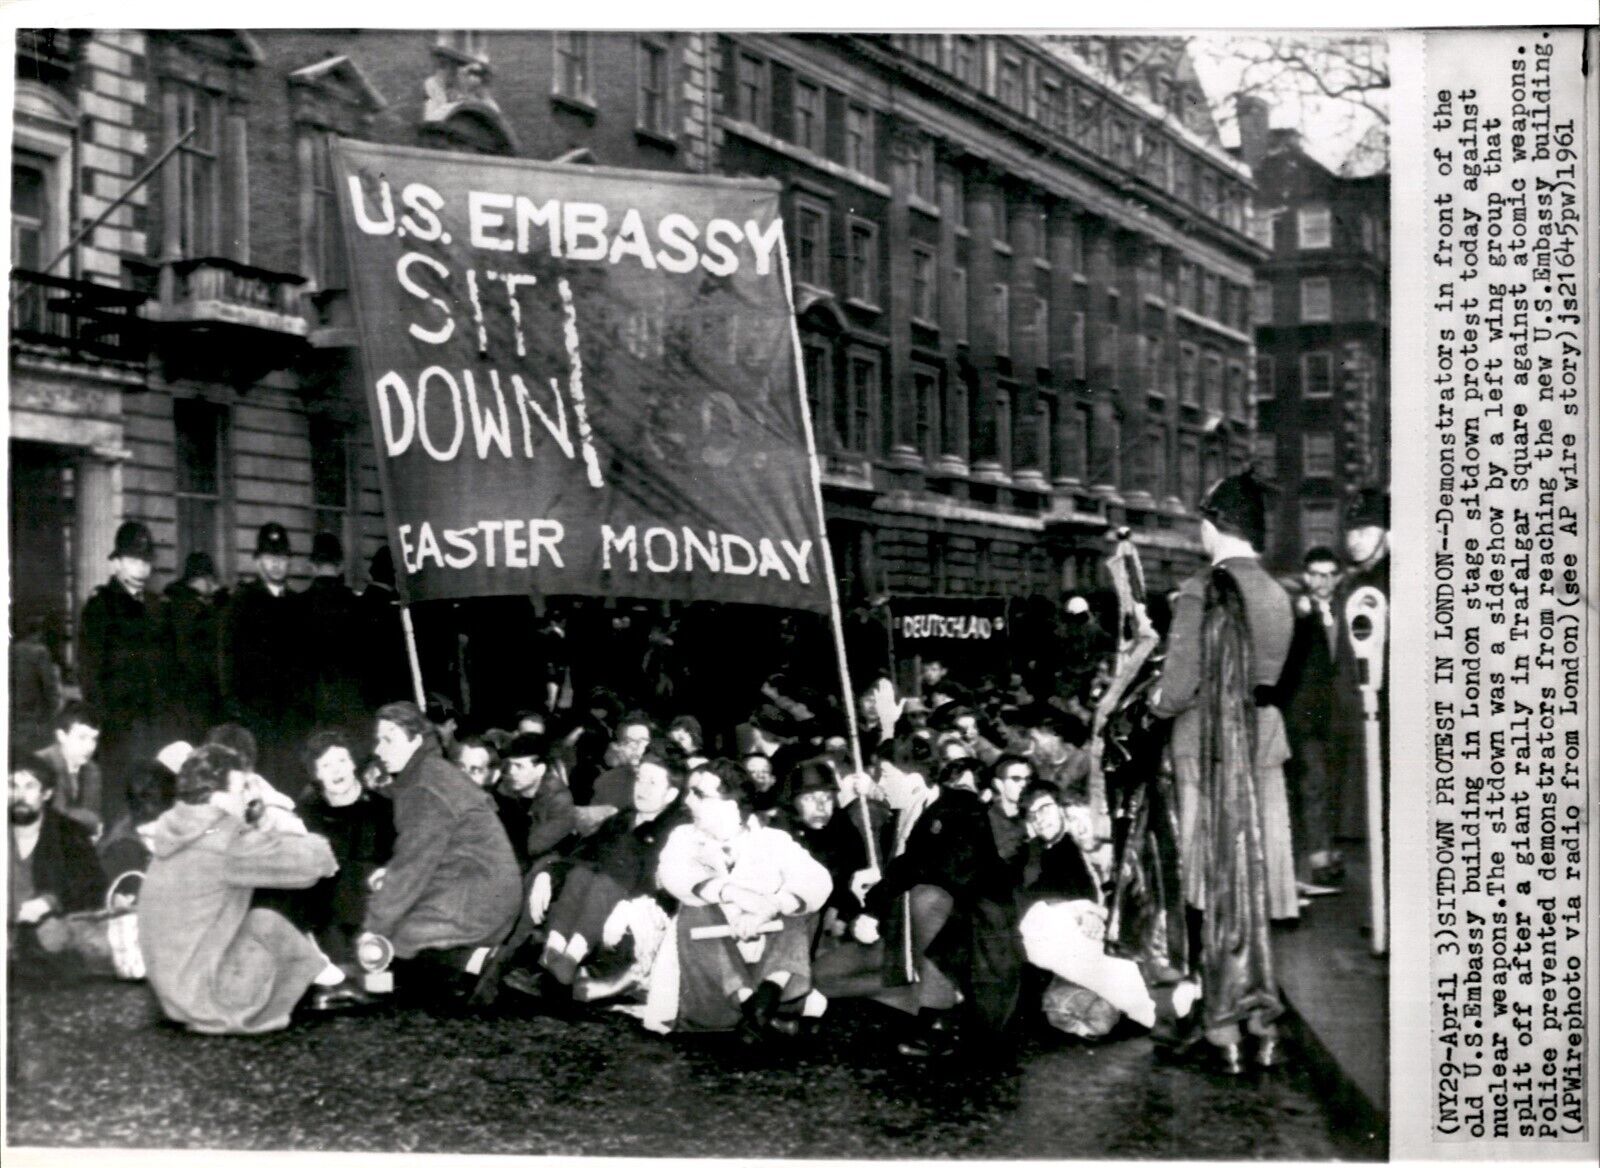 LG48 1961 Wire Photo SITDOWN PROTEST IN LONDON US Embassy Picket Nuclear Weapons